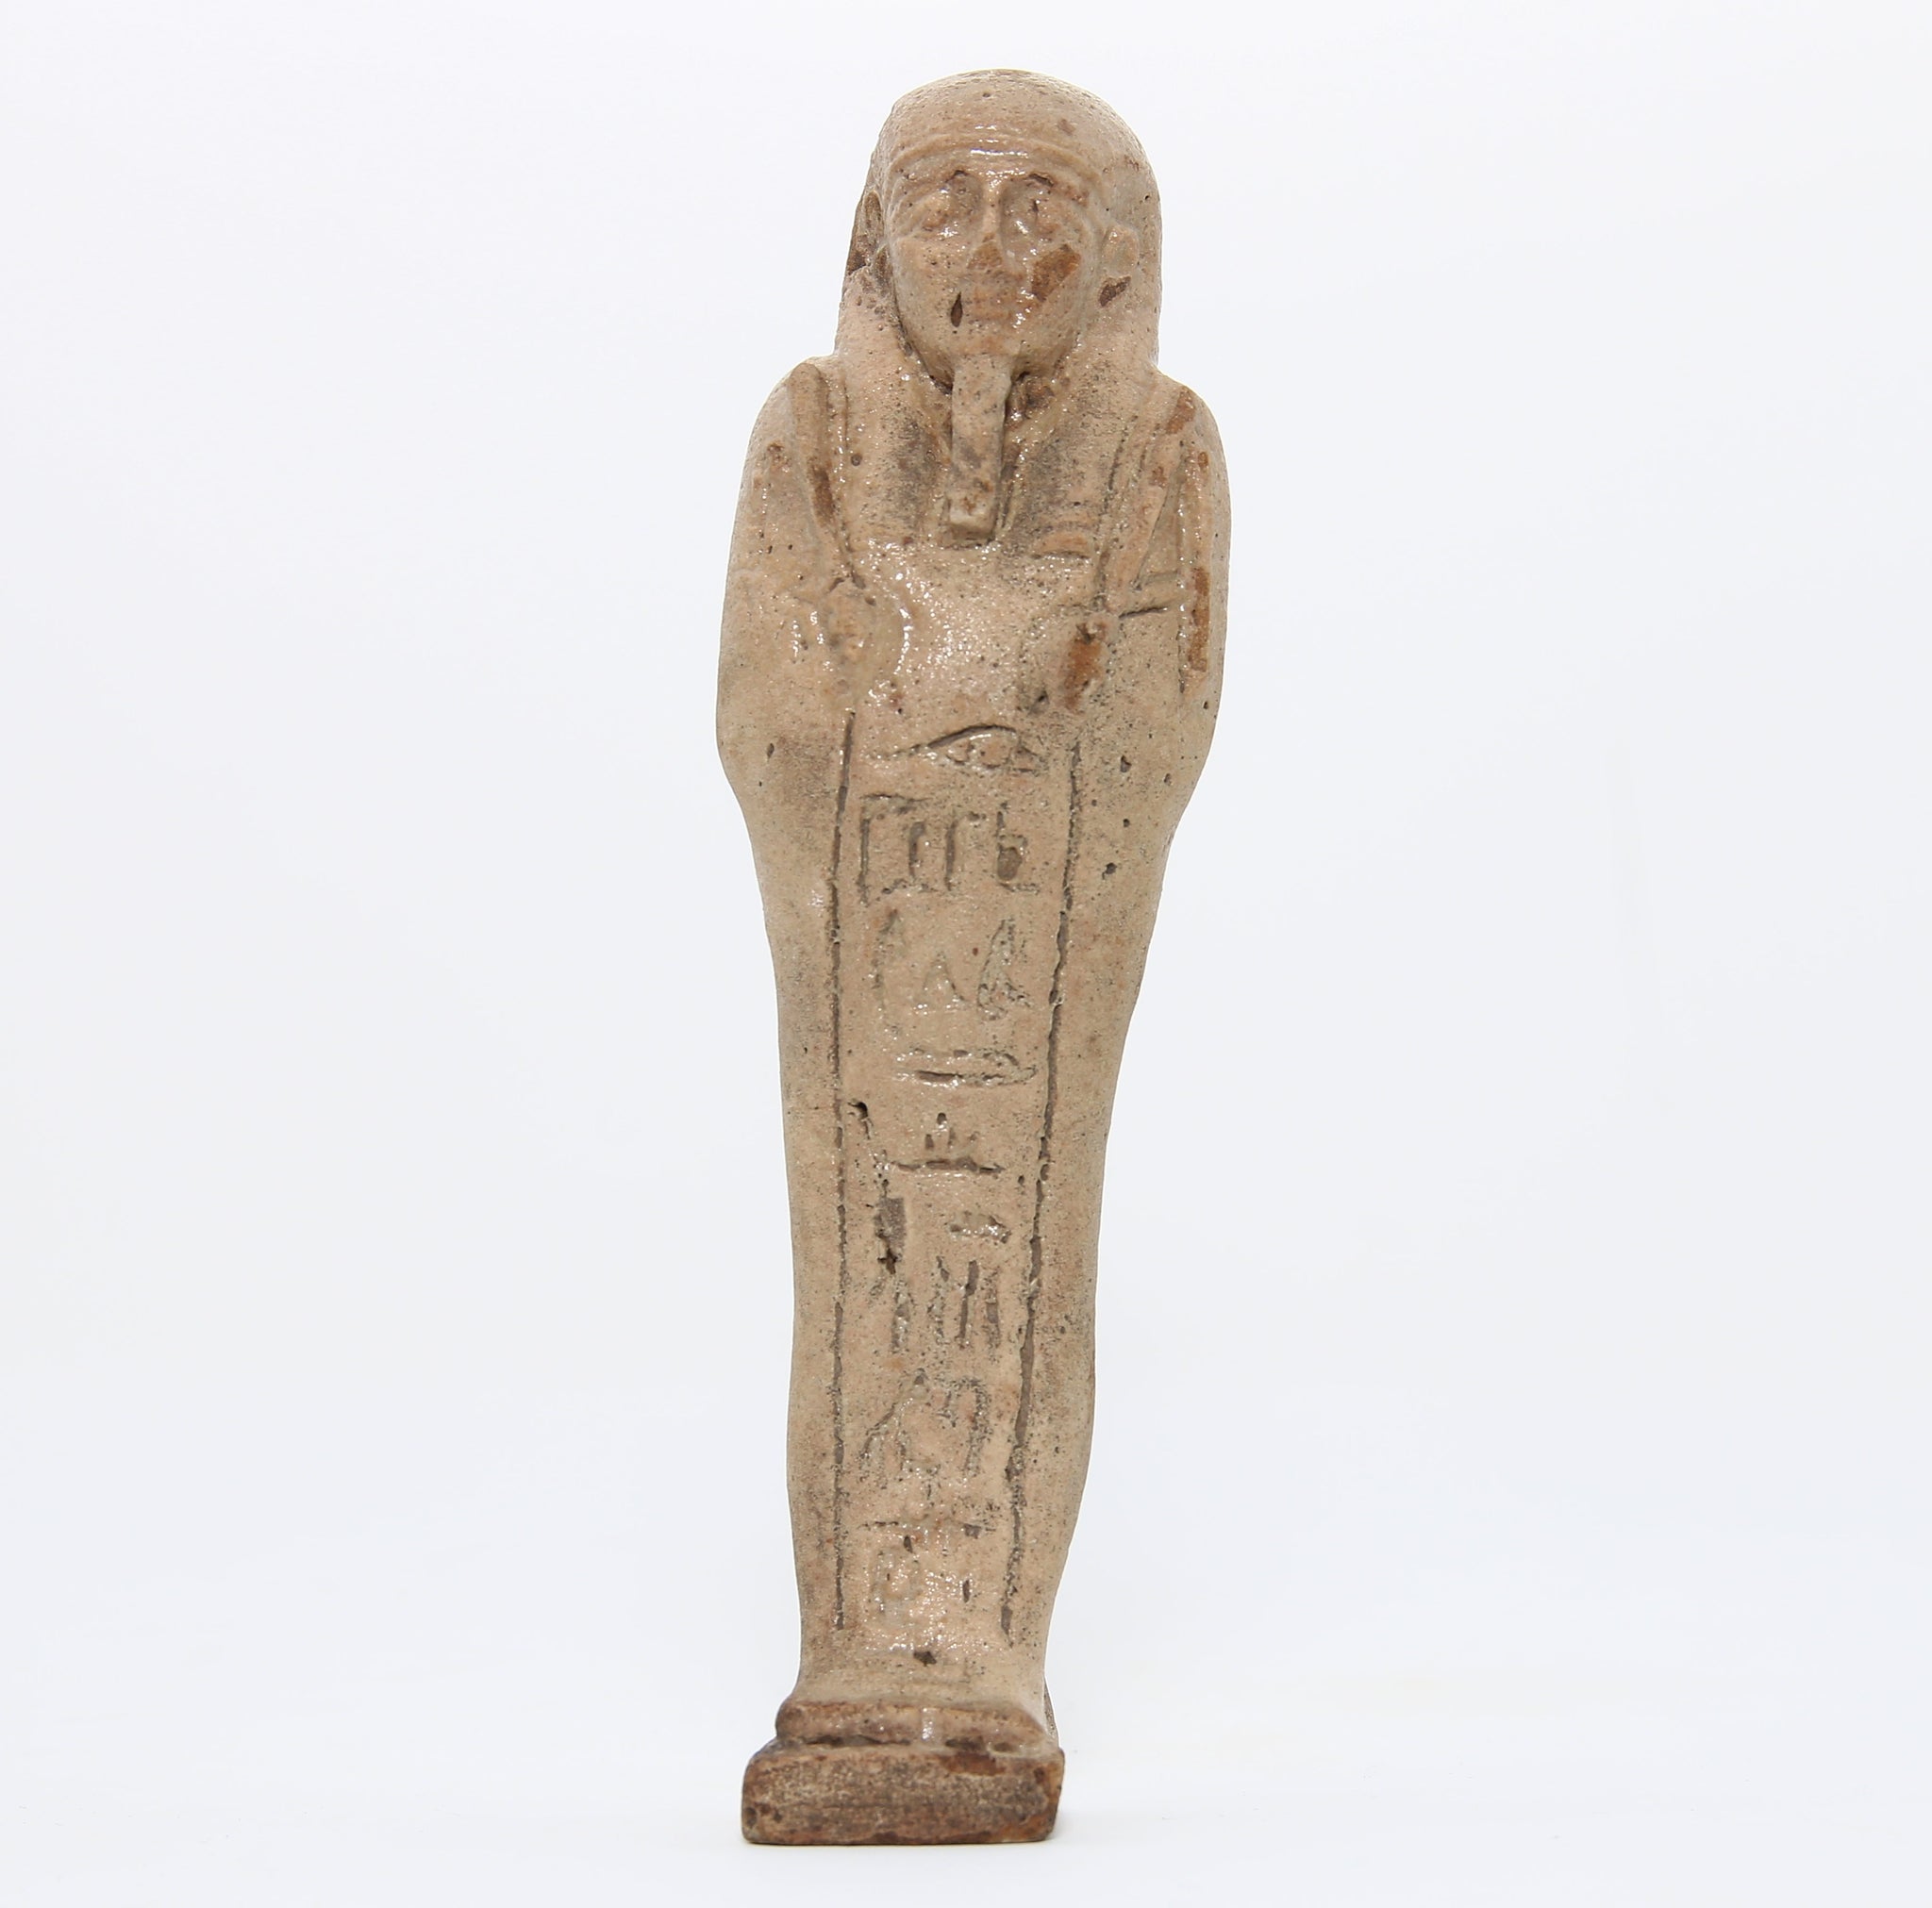 A faience shabti figure with incised inscription | Egypt, Late Dynastic Period c. 380-343 BC